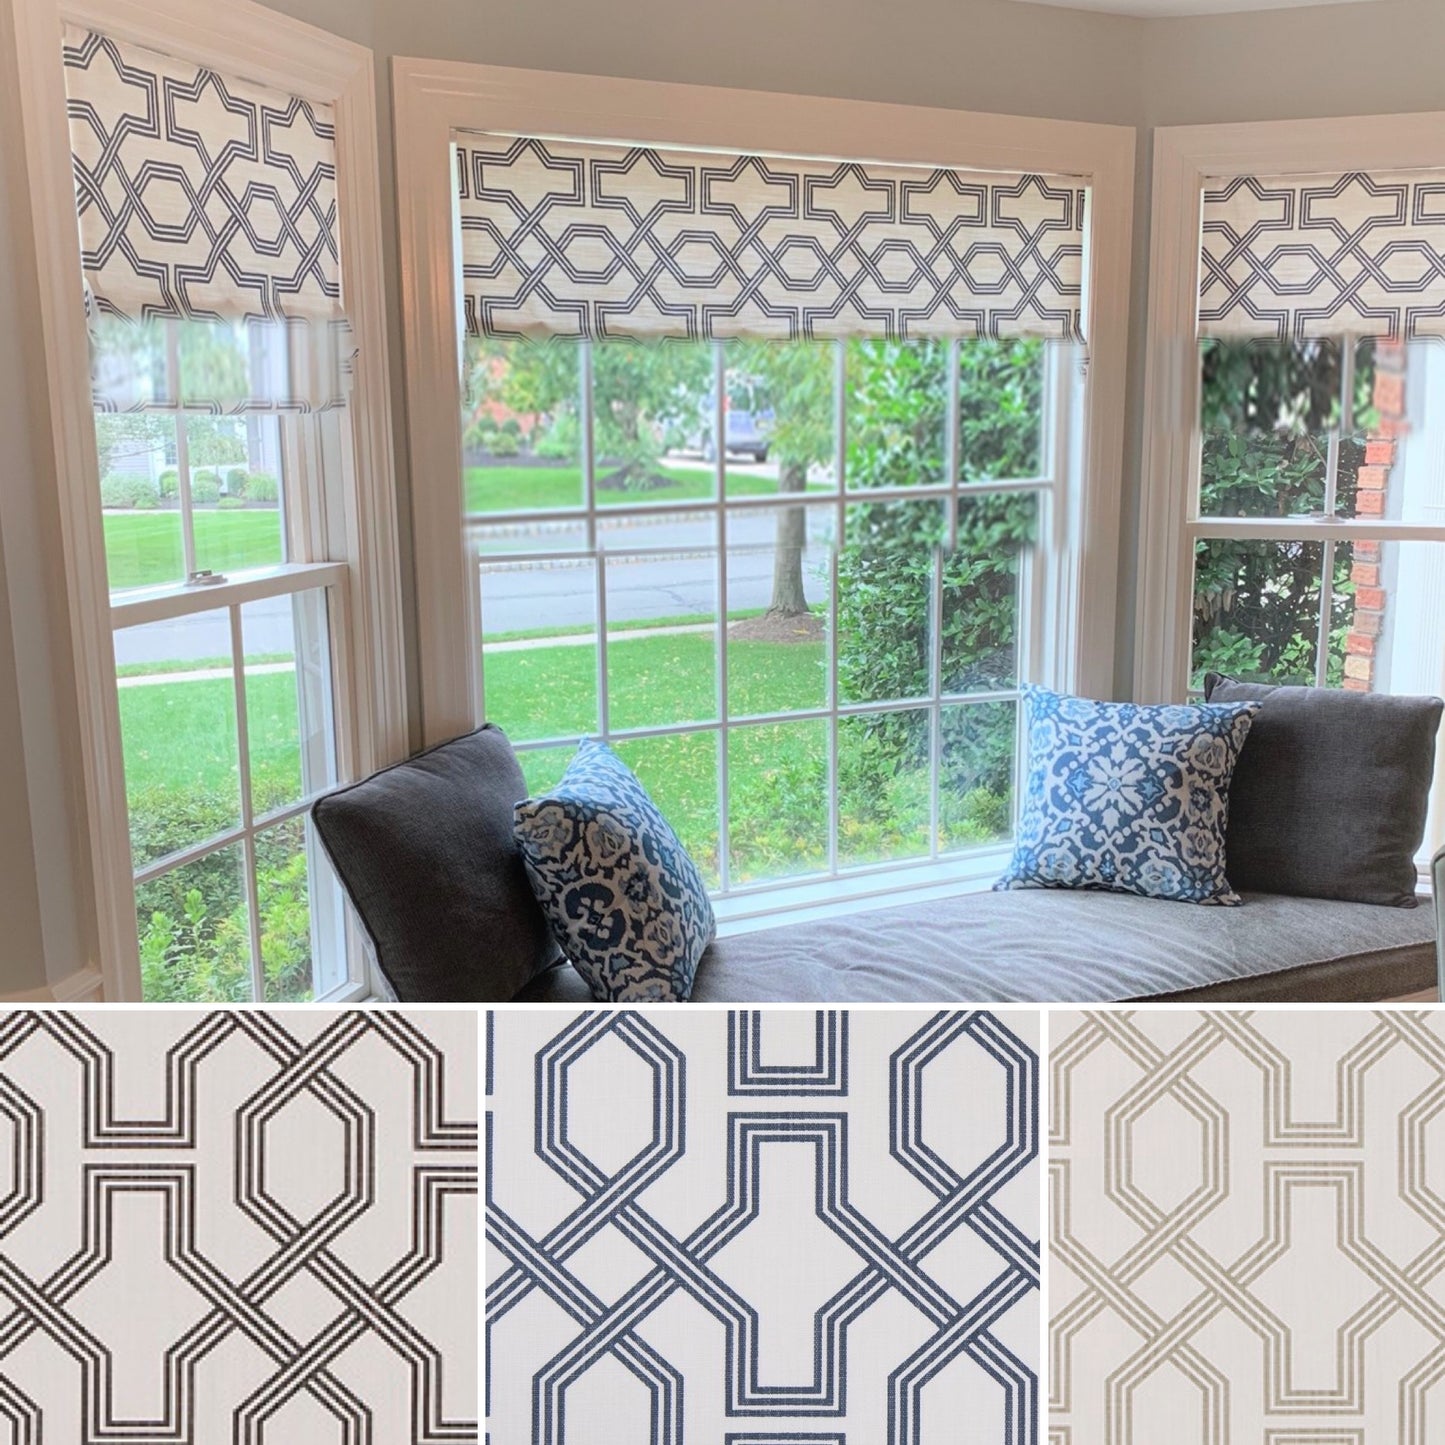 Straight Modern Valance in Ander Geometric Graphite Grey, Blue or Pewter Grey and White on Premium Cotton Linen Fabric, Custom Made Fully Lined